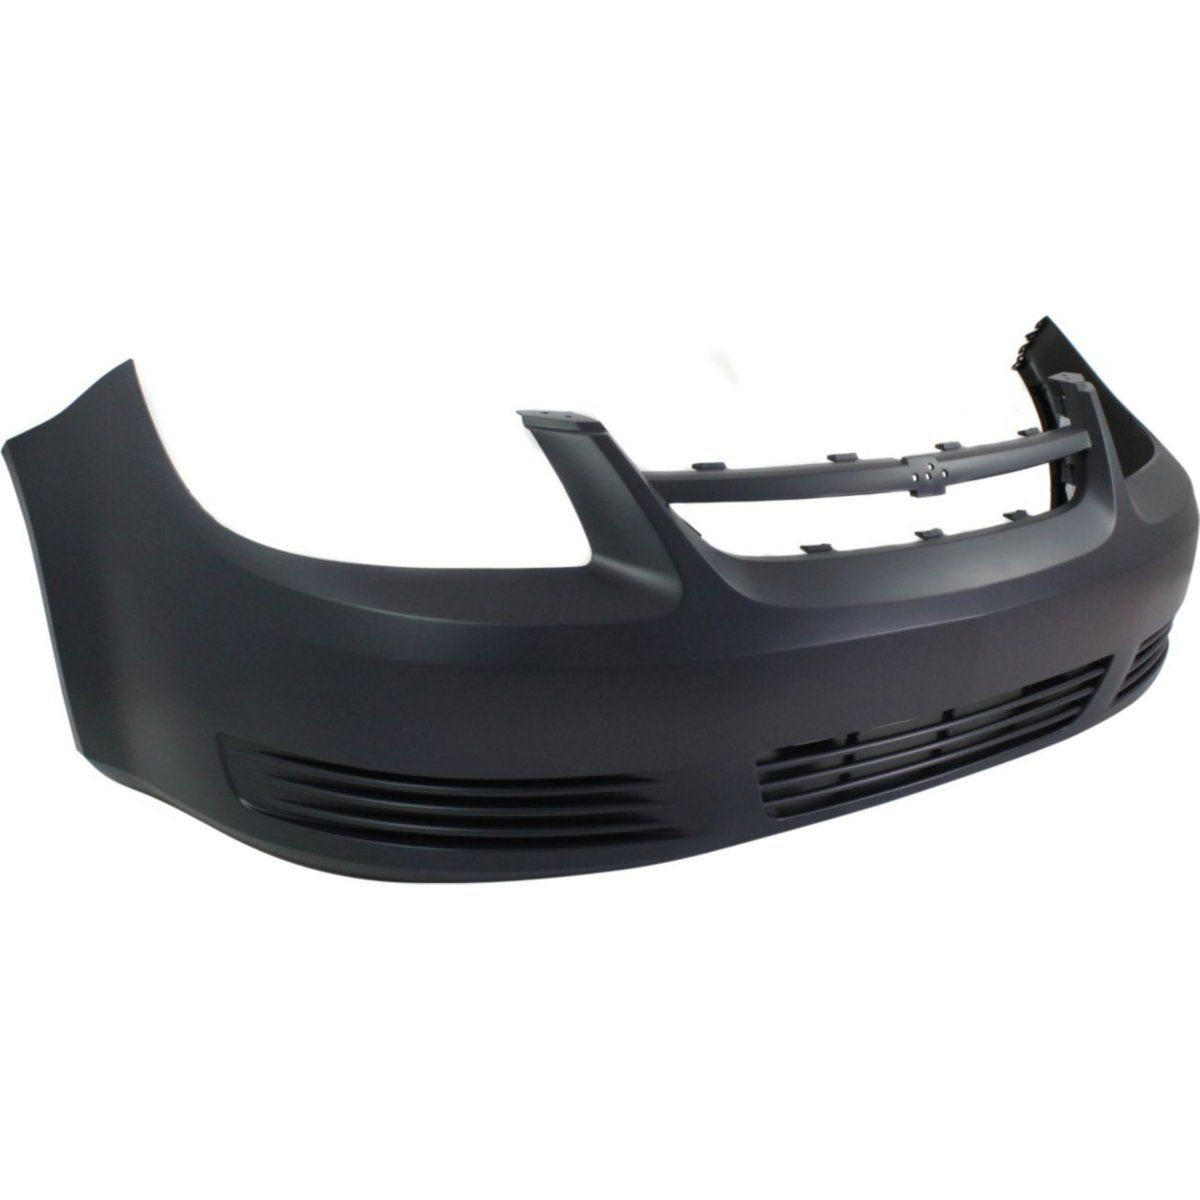 2005-2010 CHEVY COBALT Front Bumper Cover Base|LS|LT w/o Fog Lamps Painted to Match